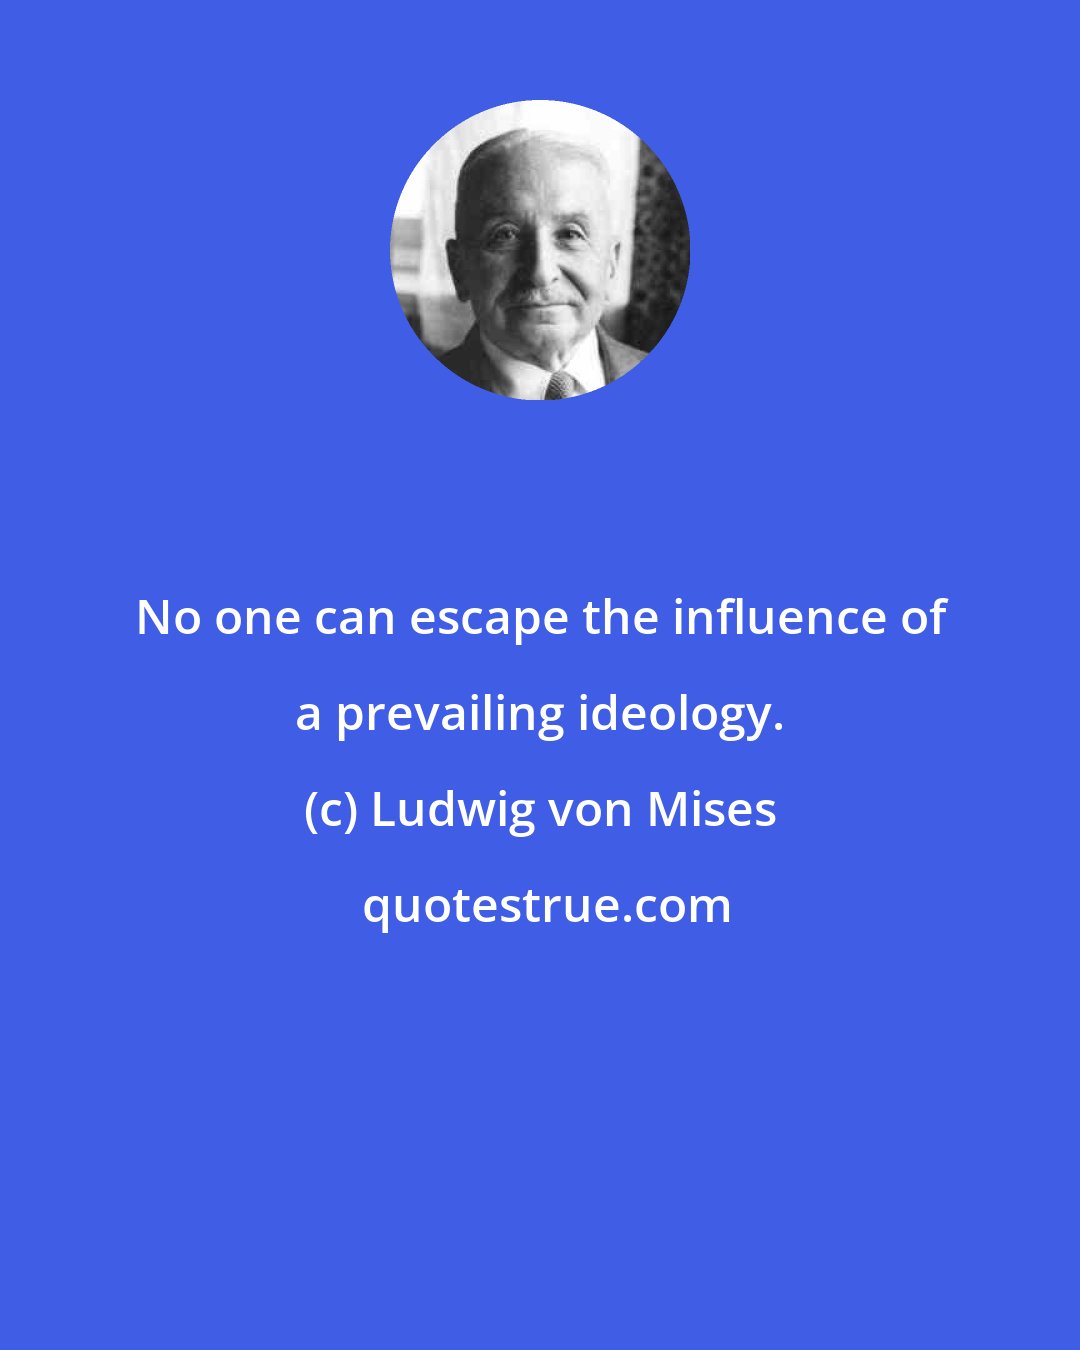 Ludwig von Mises: No one can escape the influence of a prevailing ideology.